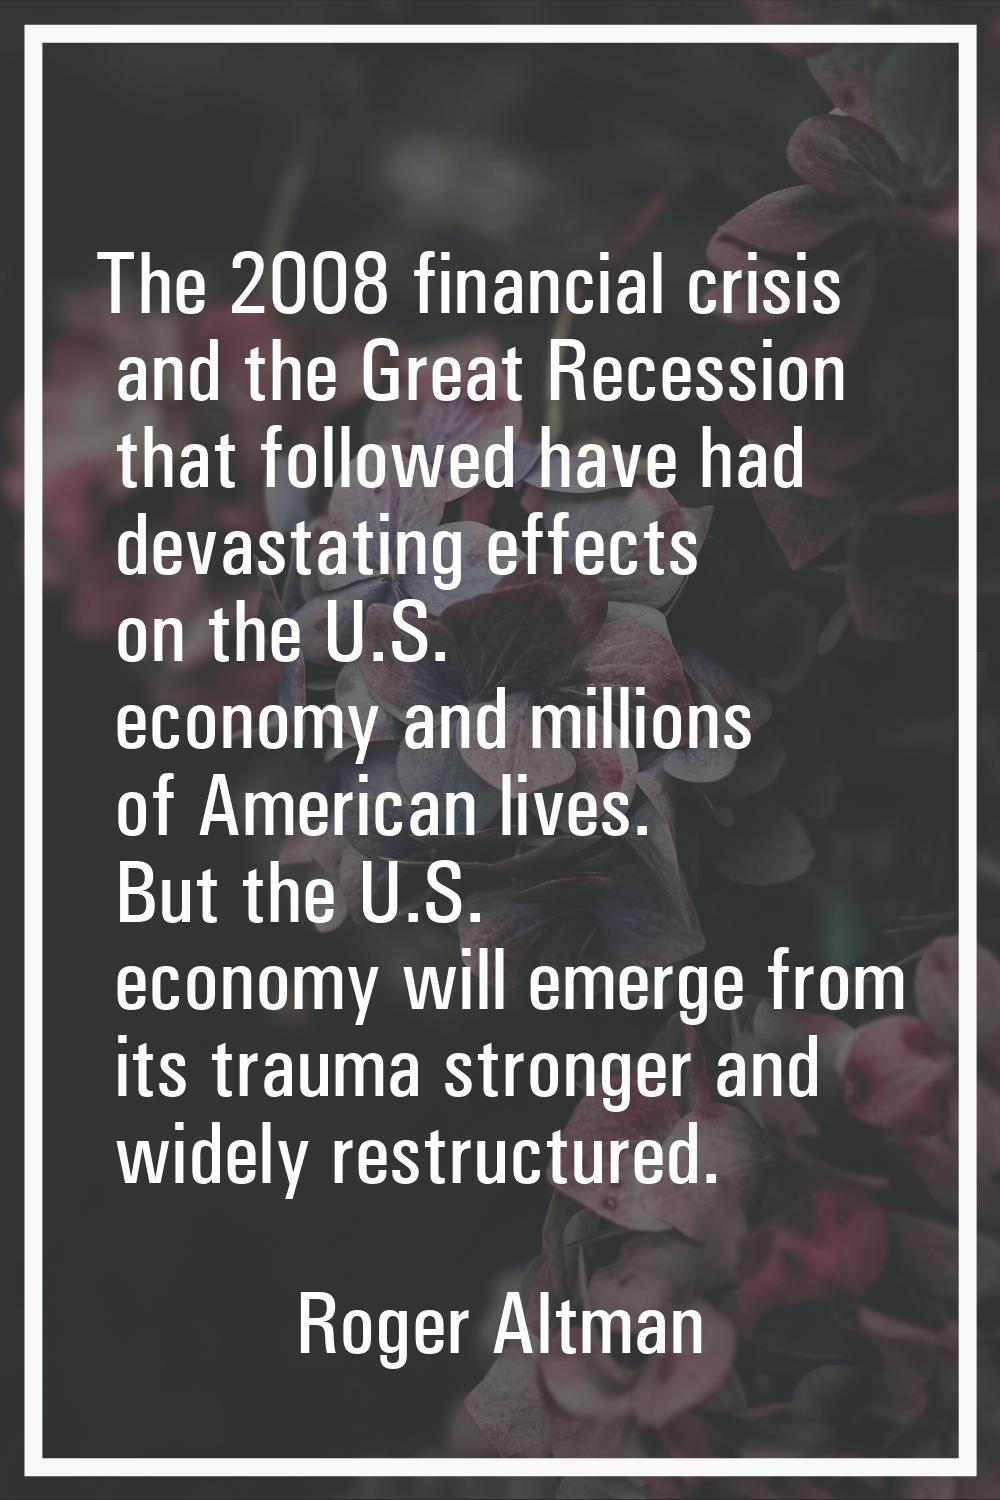 The 2008 financial crisis and the Great Recession that followed have had devastating effects on the